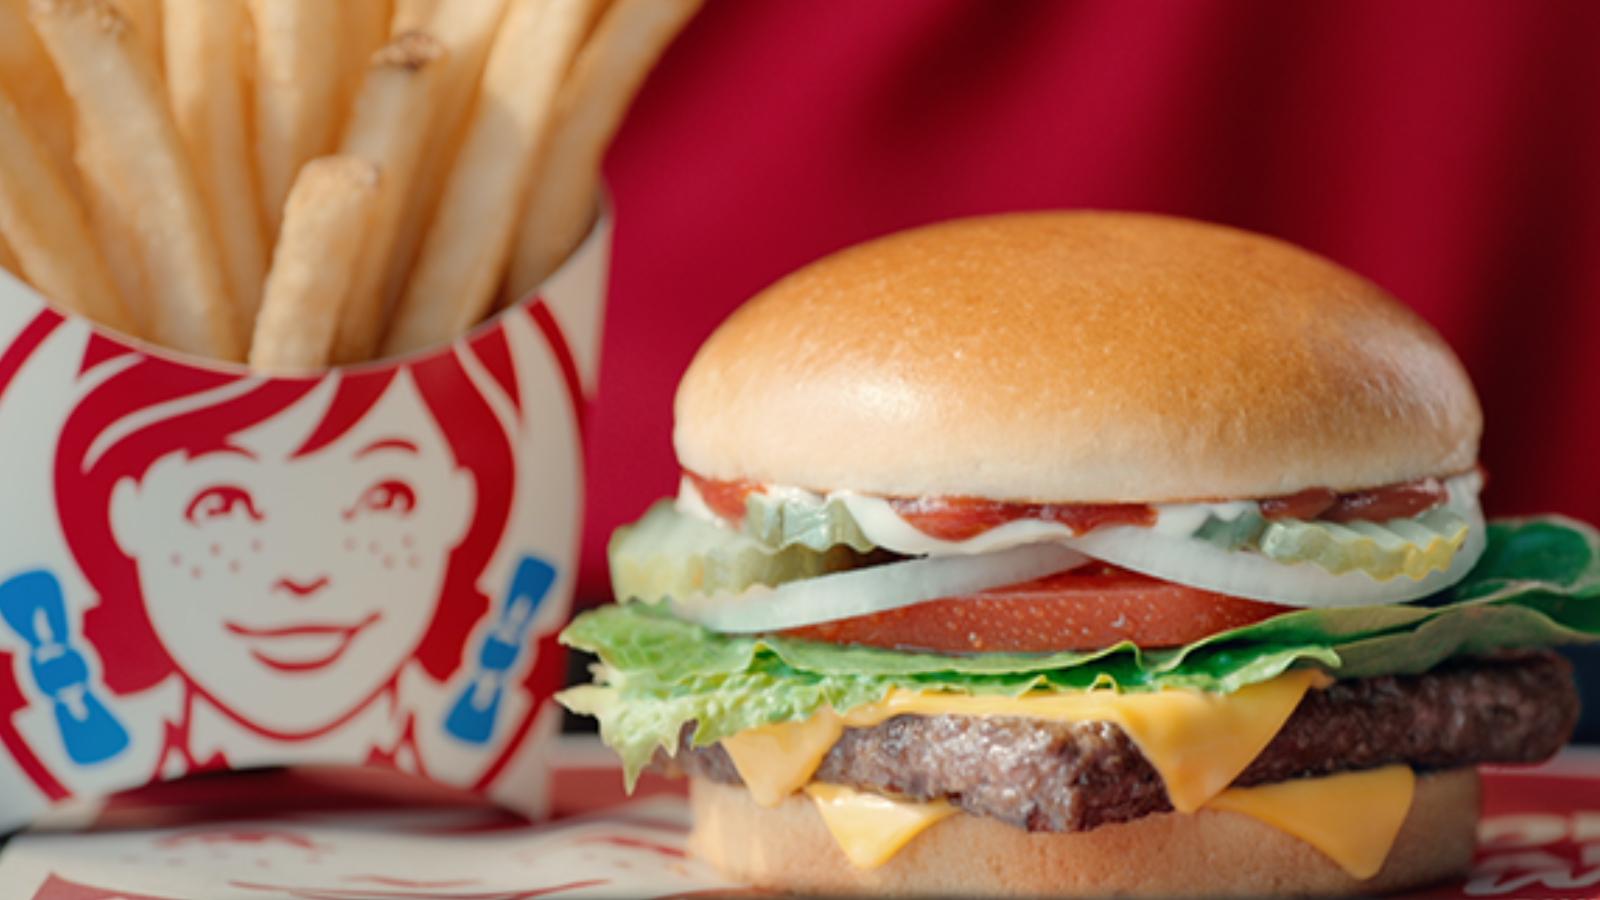 Burger King responds to Wendy's “dynamic pricing” controversy in